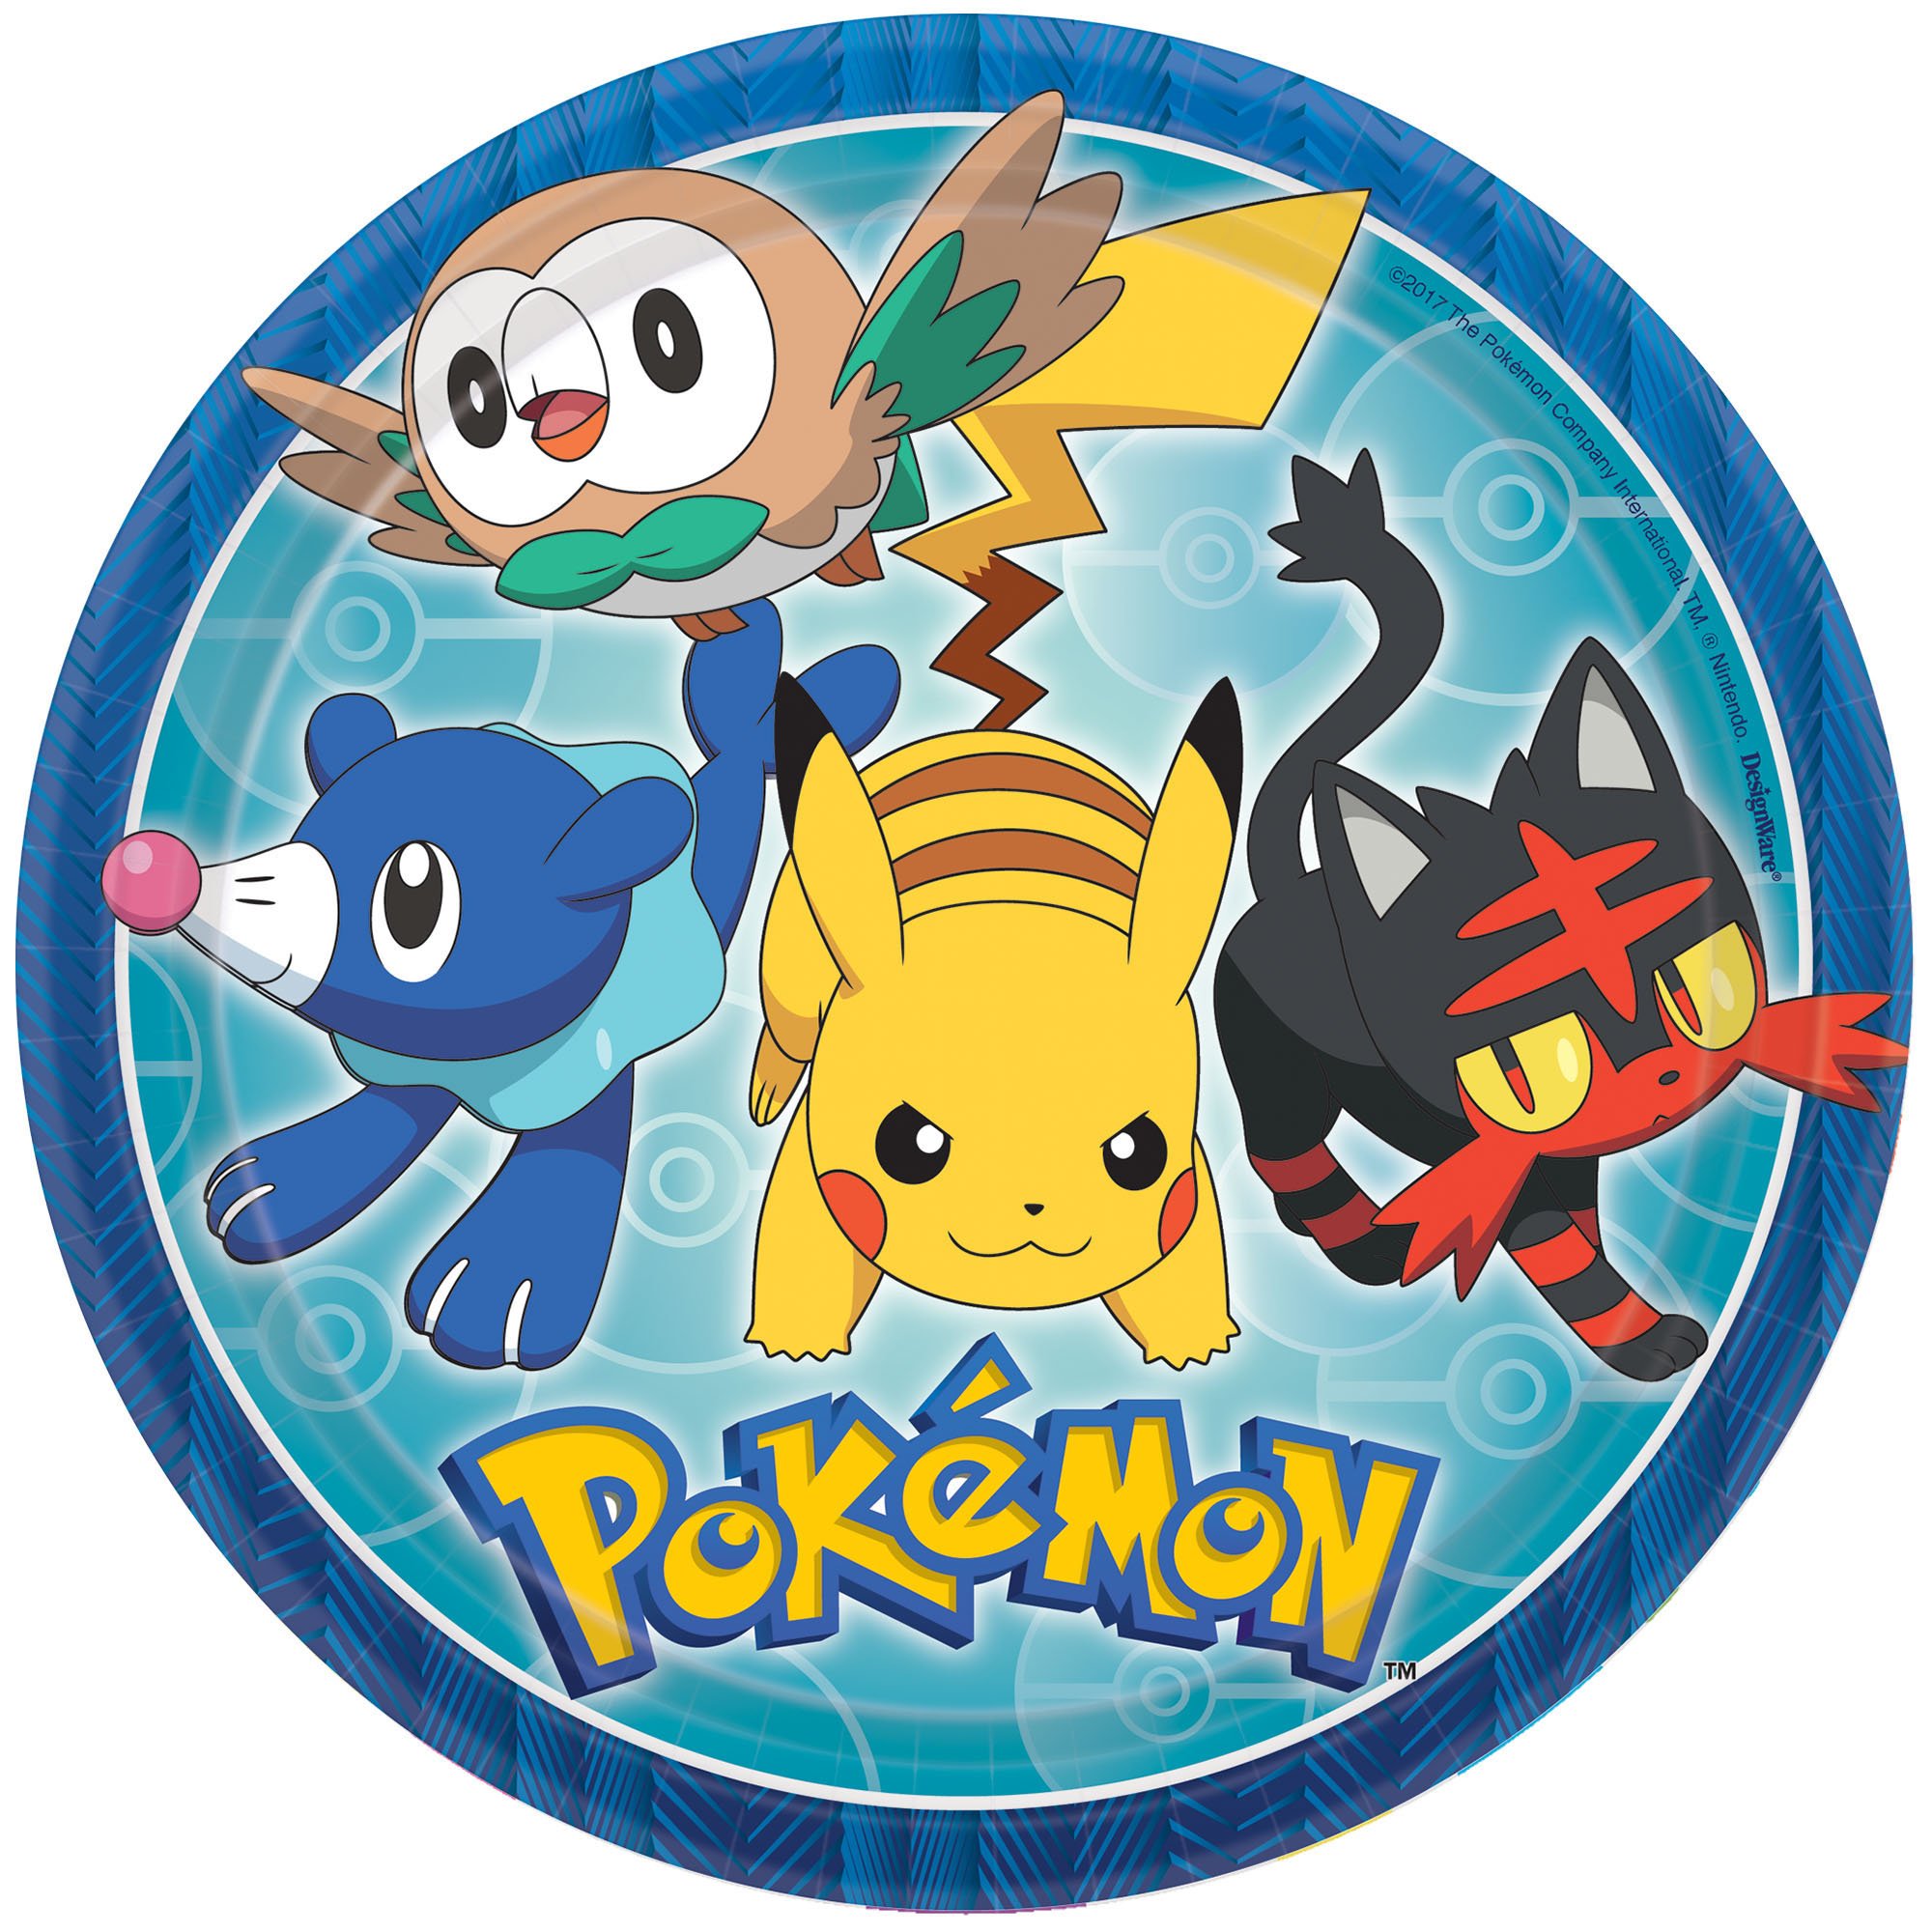 Amscan Pokemon Round Paper Plates 9 in - Shop Plates & Bowls at H-E-B